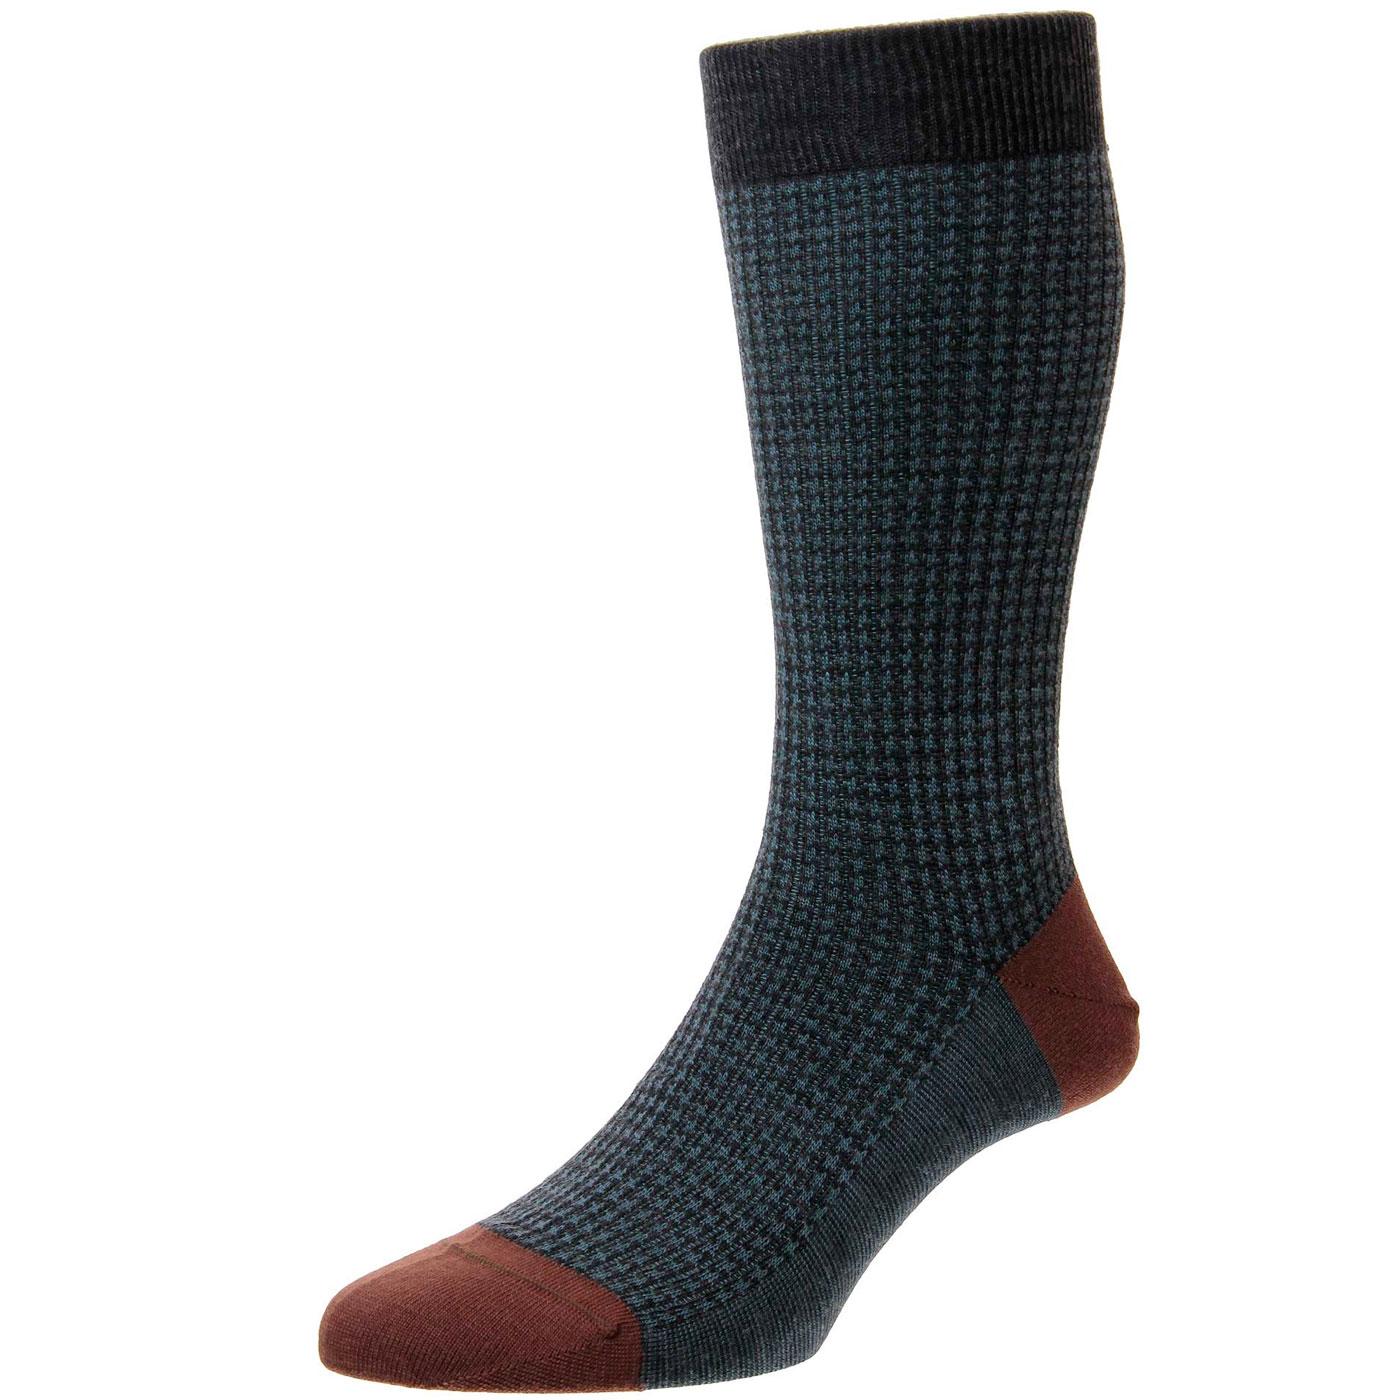 PANTHERELLA Hatherley Mod Houndstooth Socks in Charcoal